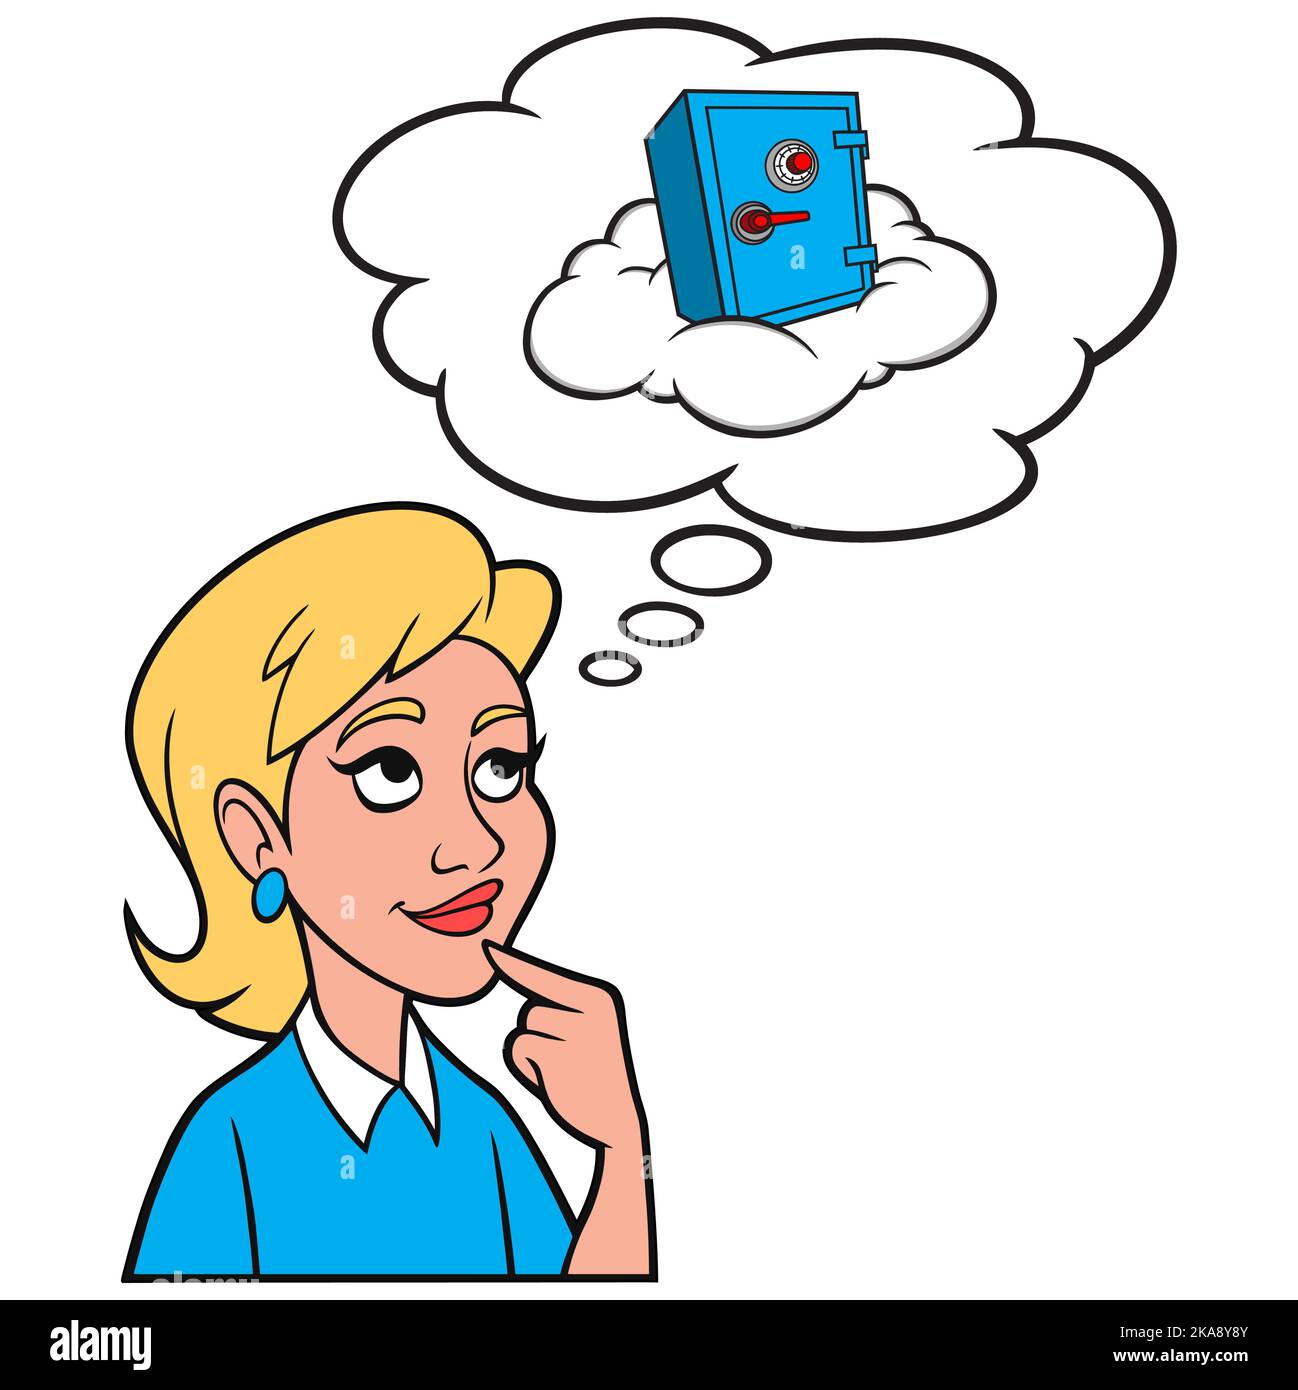 Girl thinking about Cloud Security - A cartoon illustration of a Girl thinking about Cloud Security to protect her Computer Data. Stock Vector